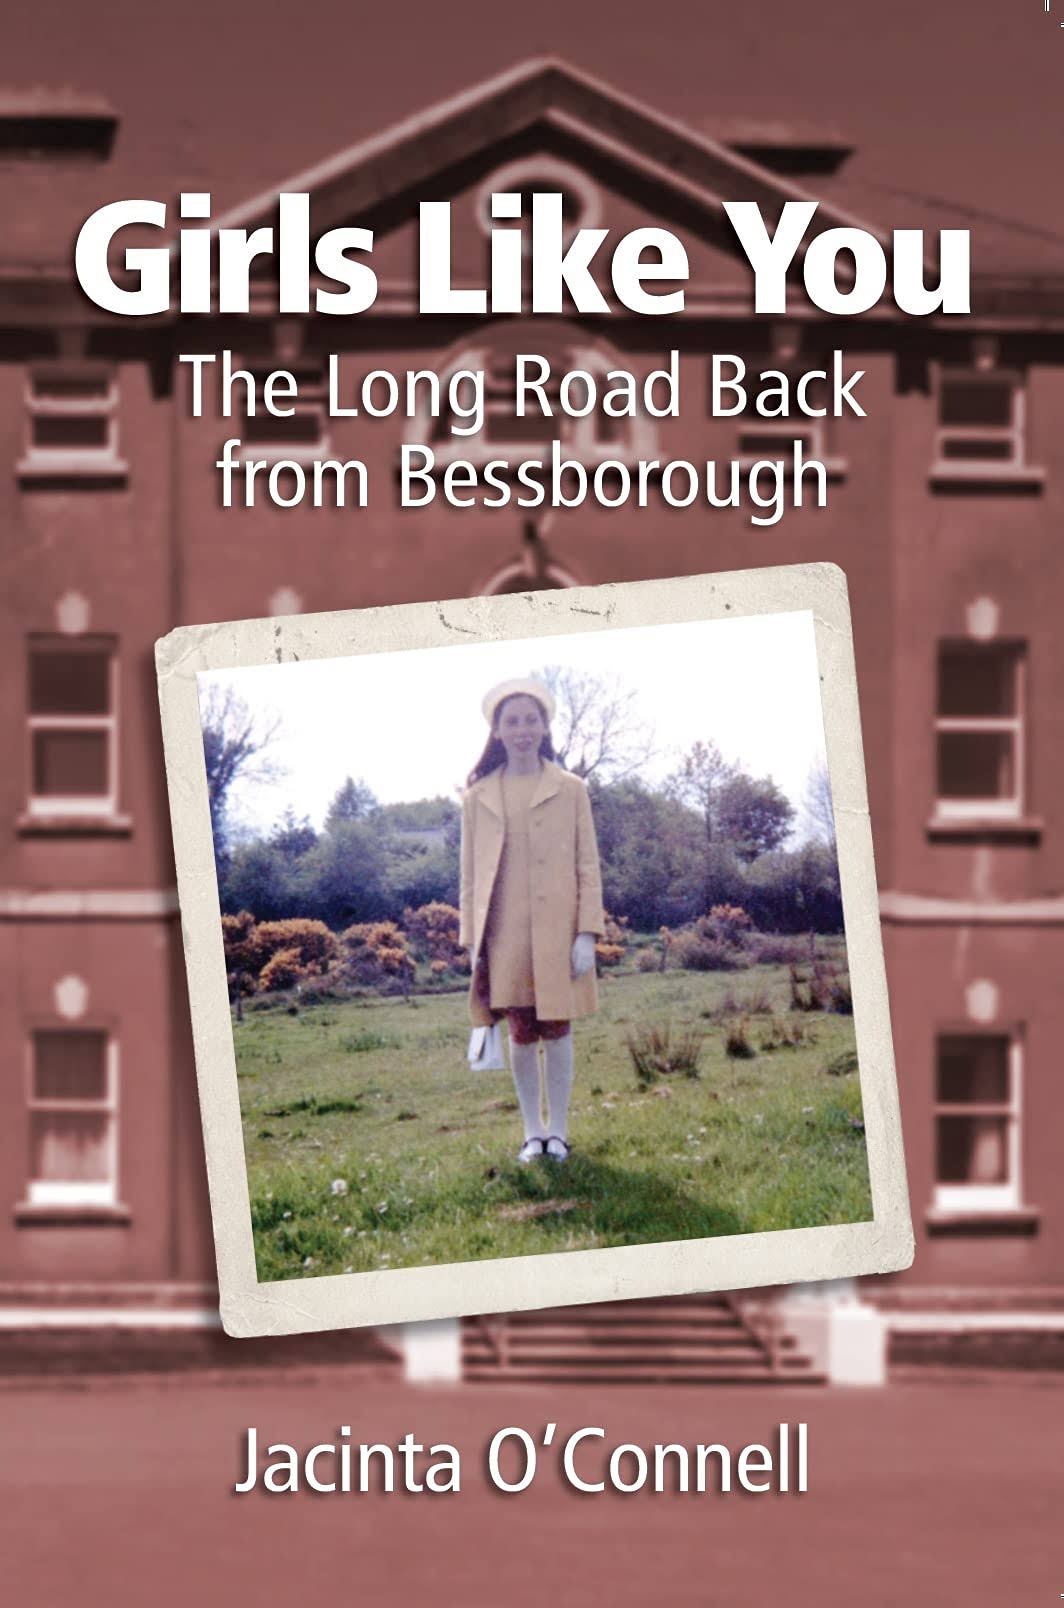 Girls Like You: The Long Road Back from Bessborough [Book]